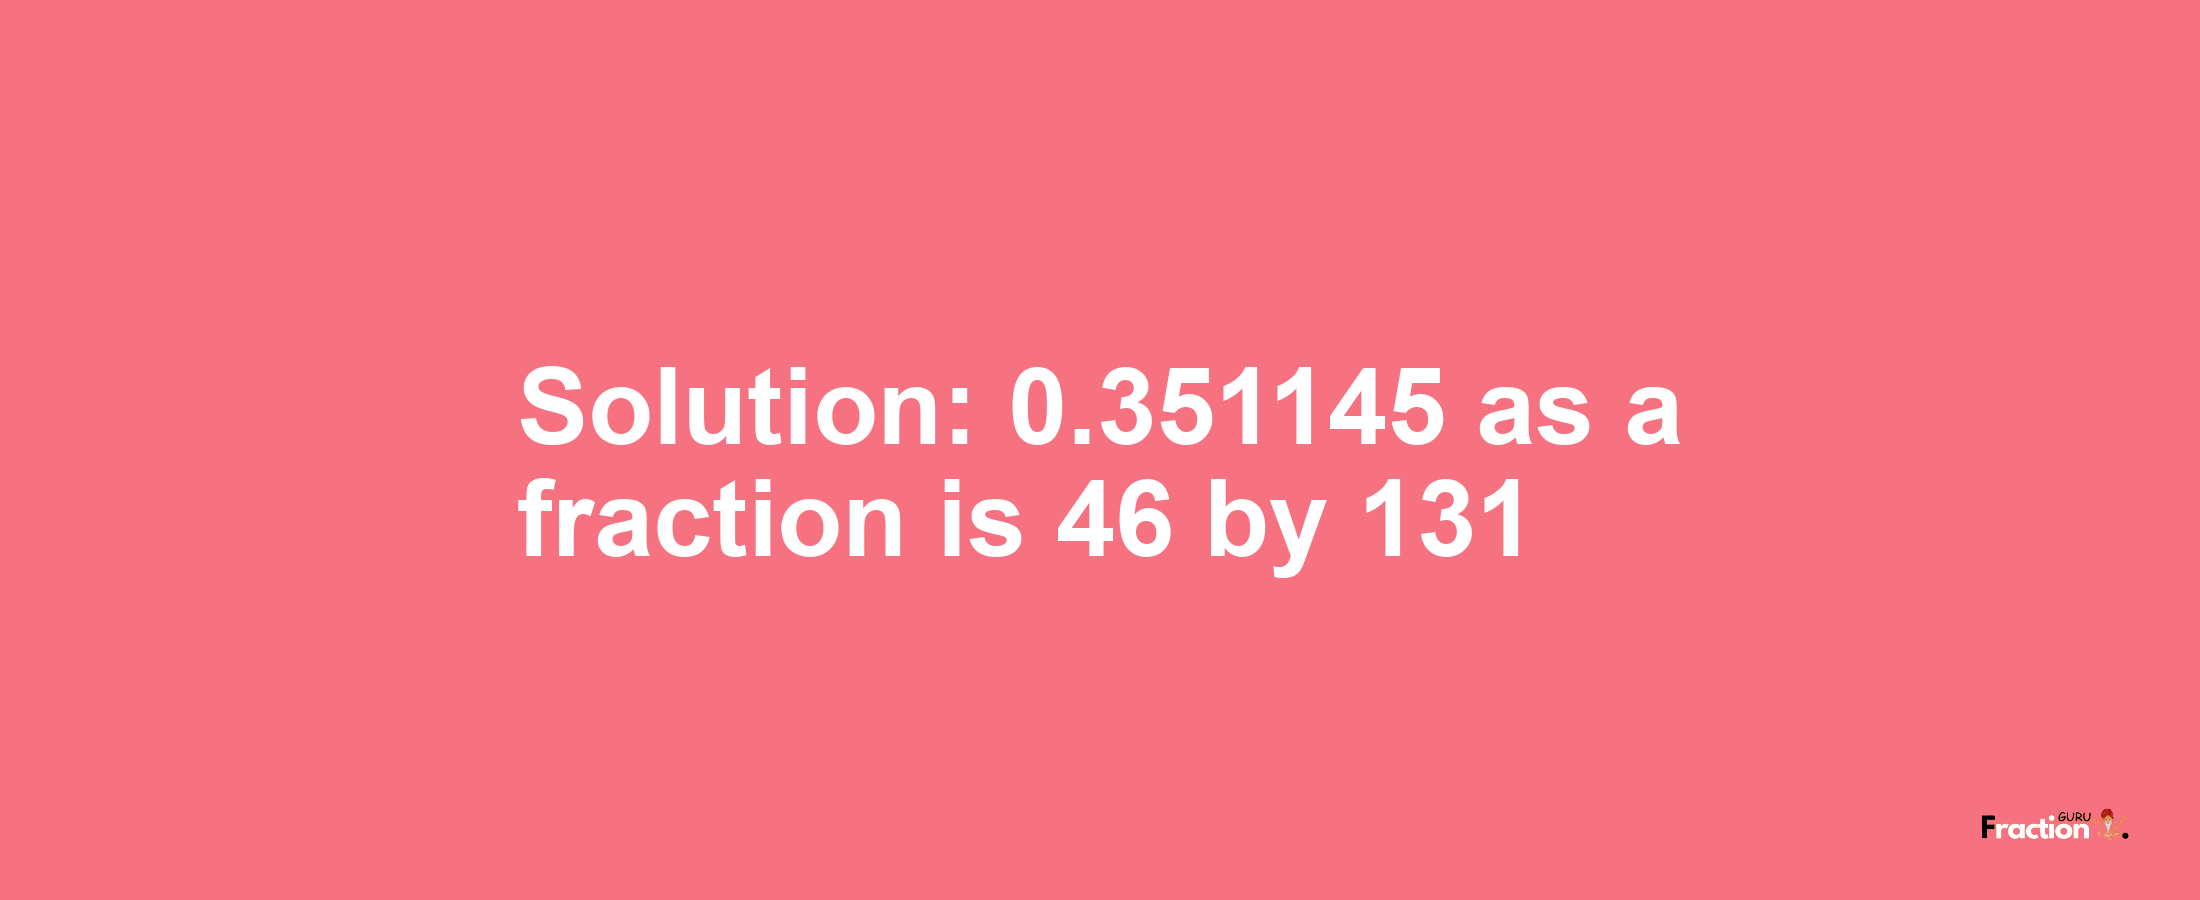 Solution:0.351145 as a fraction is 46/131